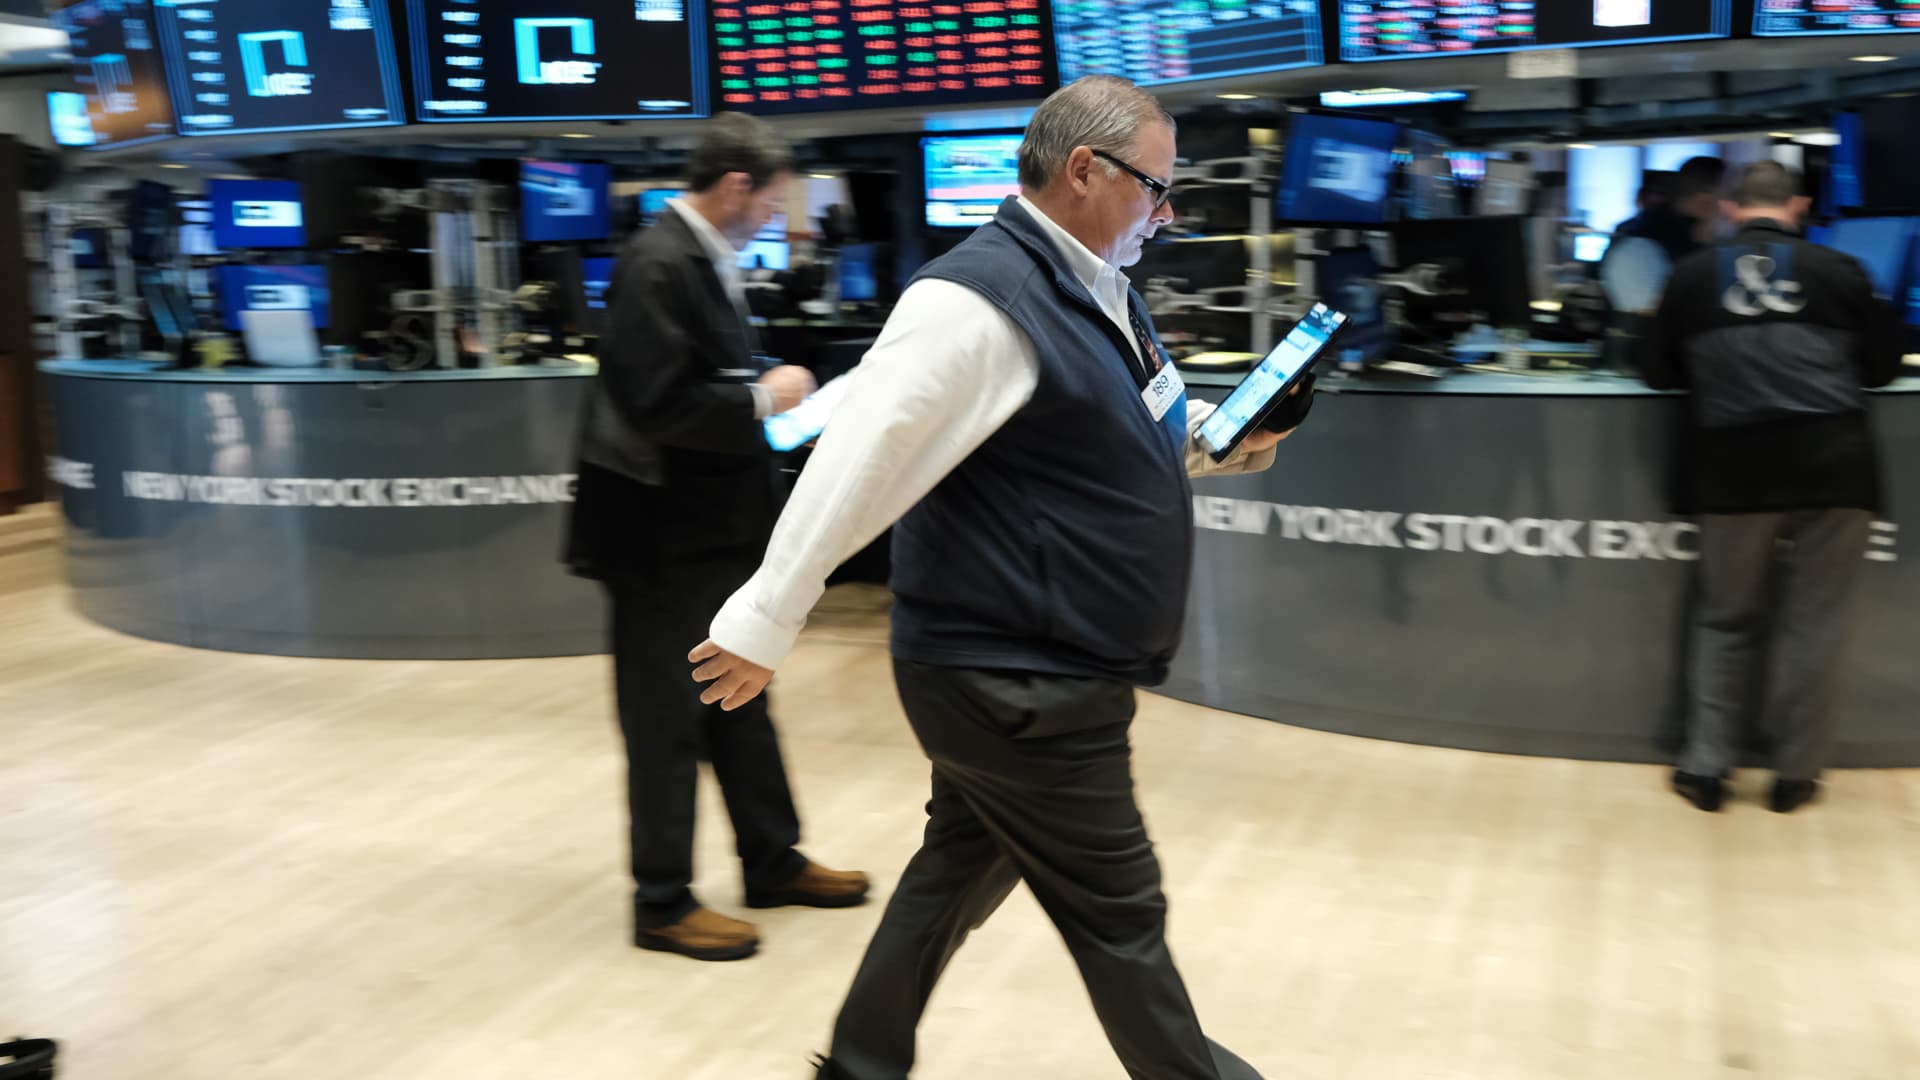 Stock futures tick up slightly on Wednesday after two-day market rally ends - CNBC